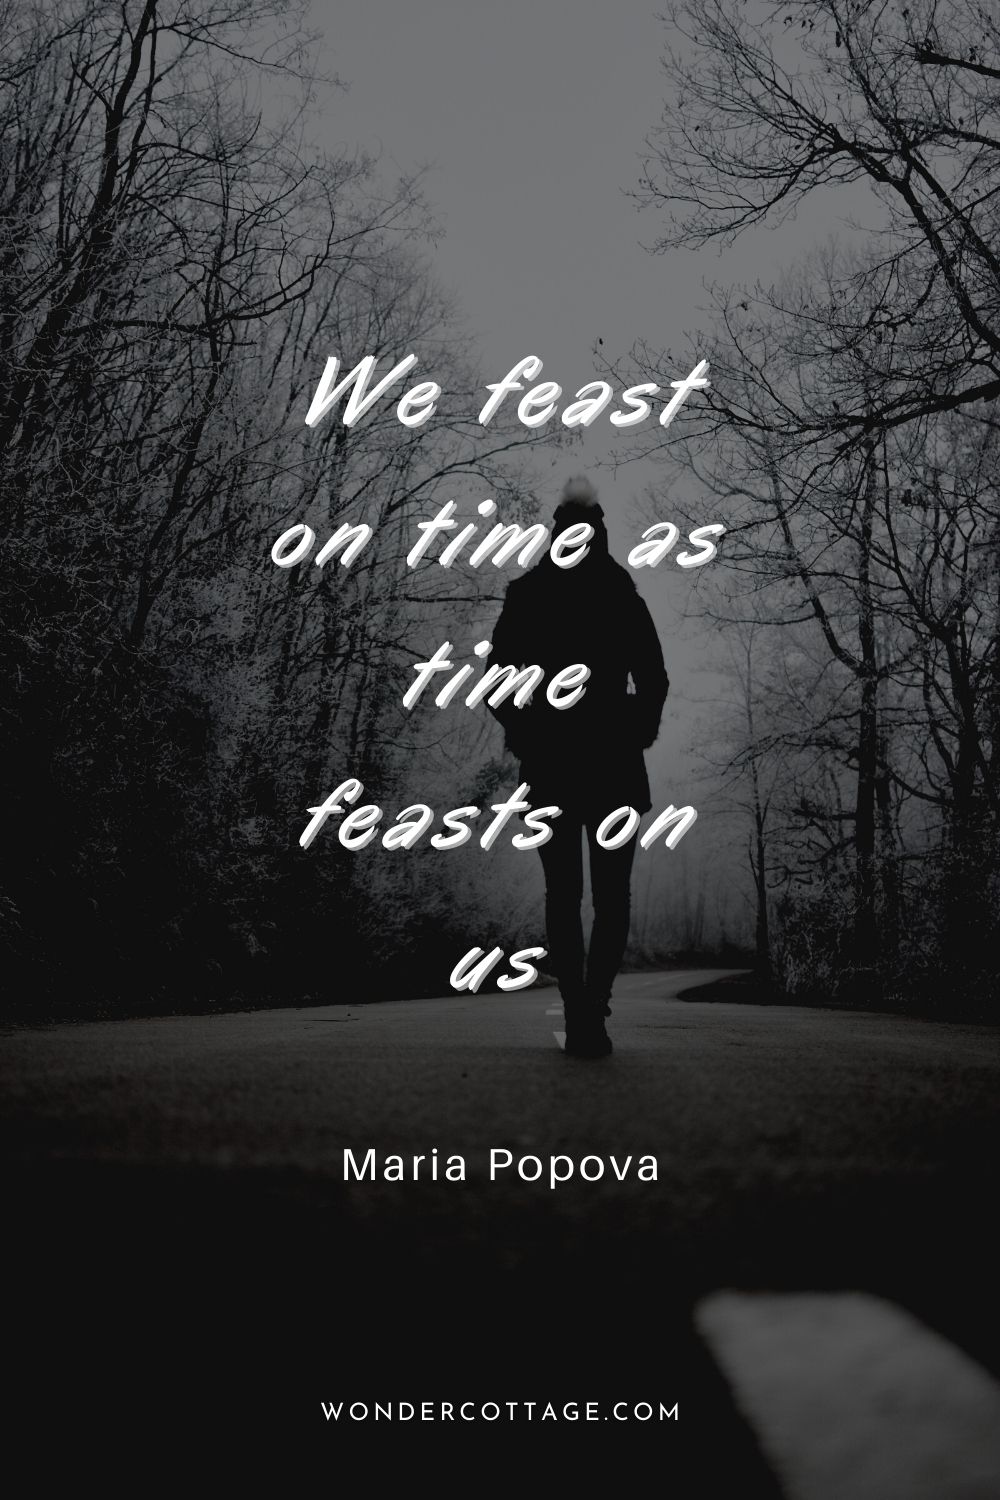 We feast on time as time feasts on us.  Maria Popova